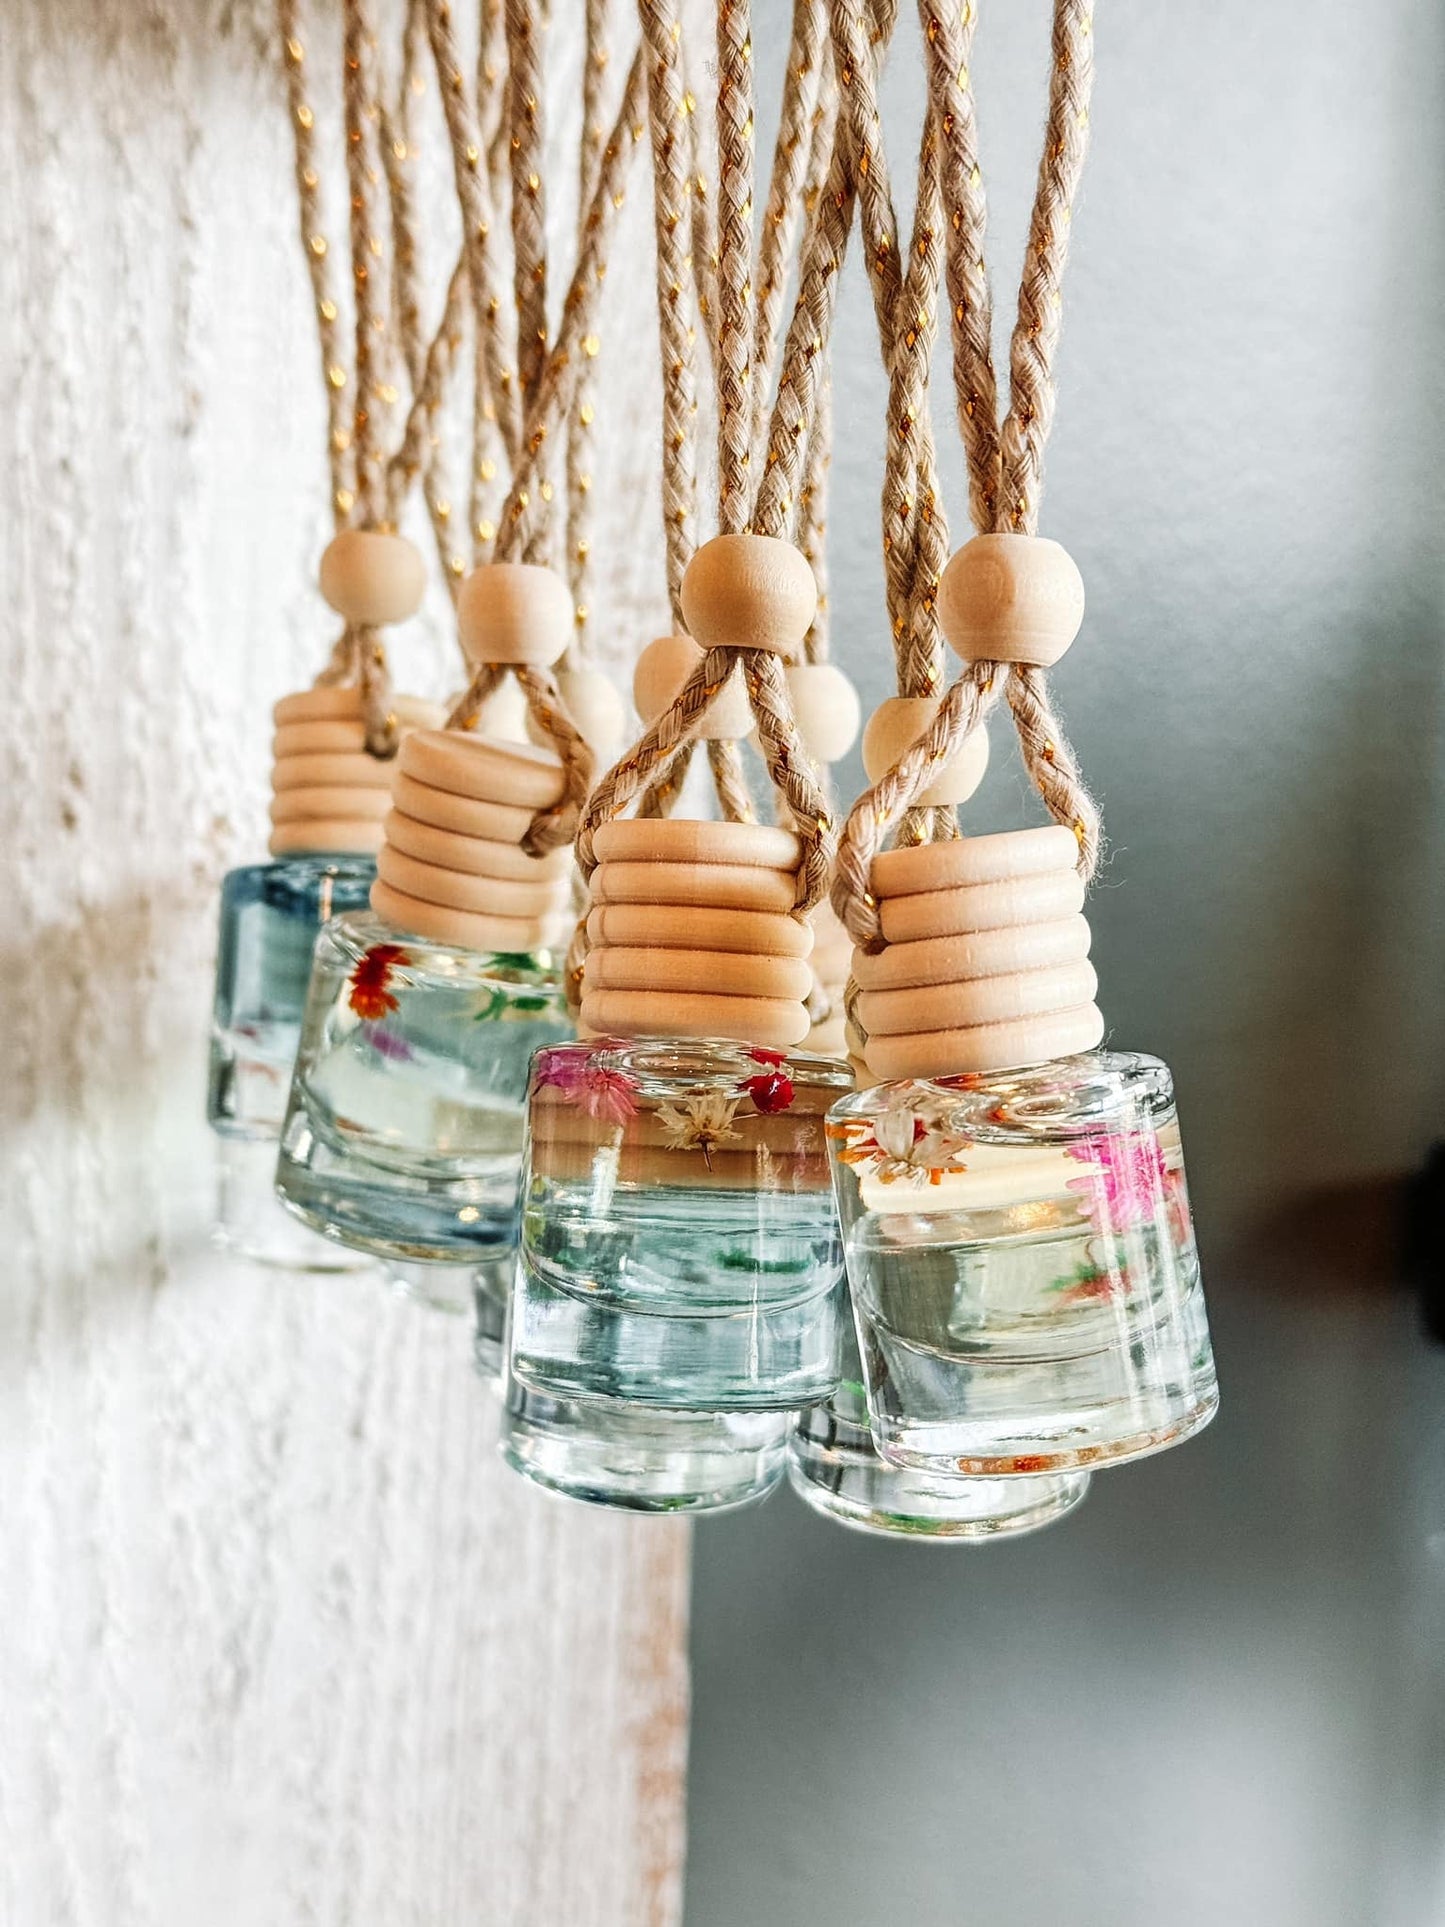 PREORDER: Essential Oil Diffusers in Assorted Scents